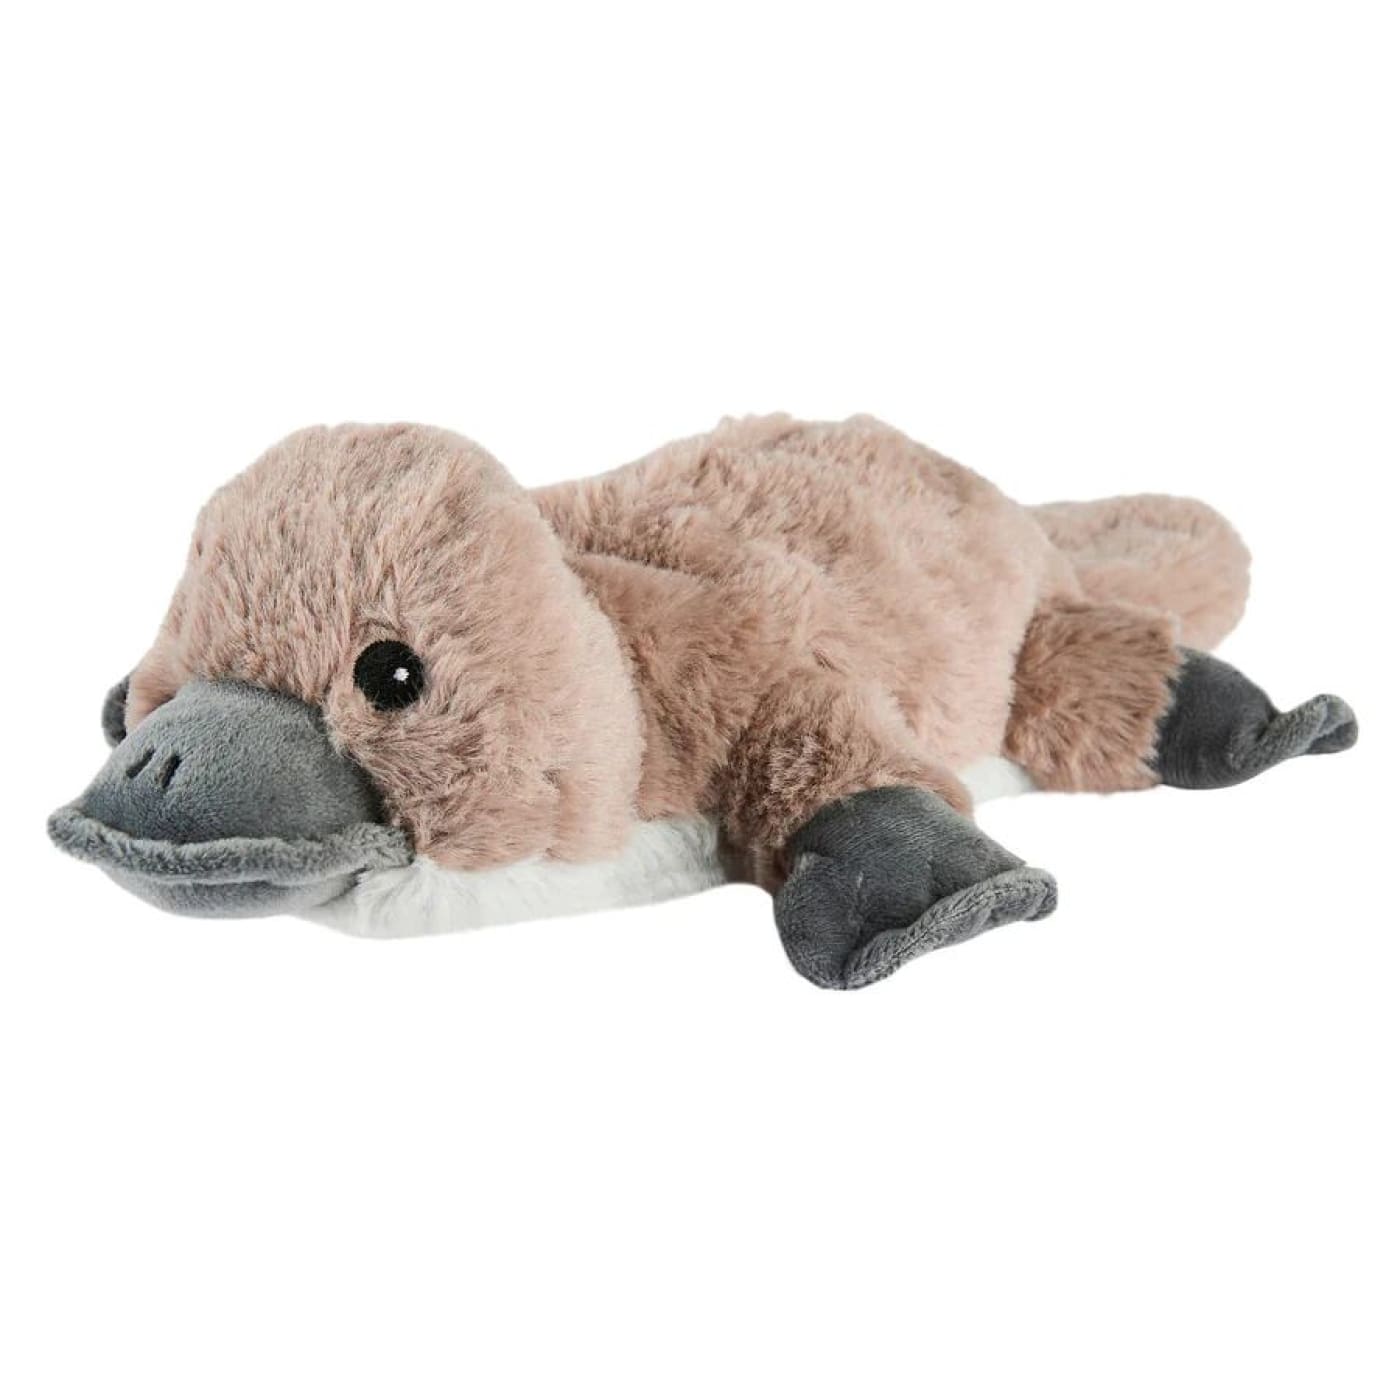 Warmies Heatable Soft Toy Scented with French Lavender - Platypus - Platypus - HEALTH & HOME SAFETY - THERMOMETERS/MEDICINAL